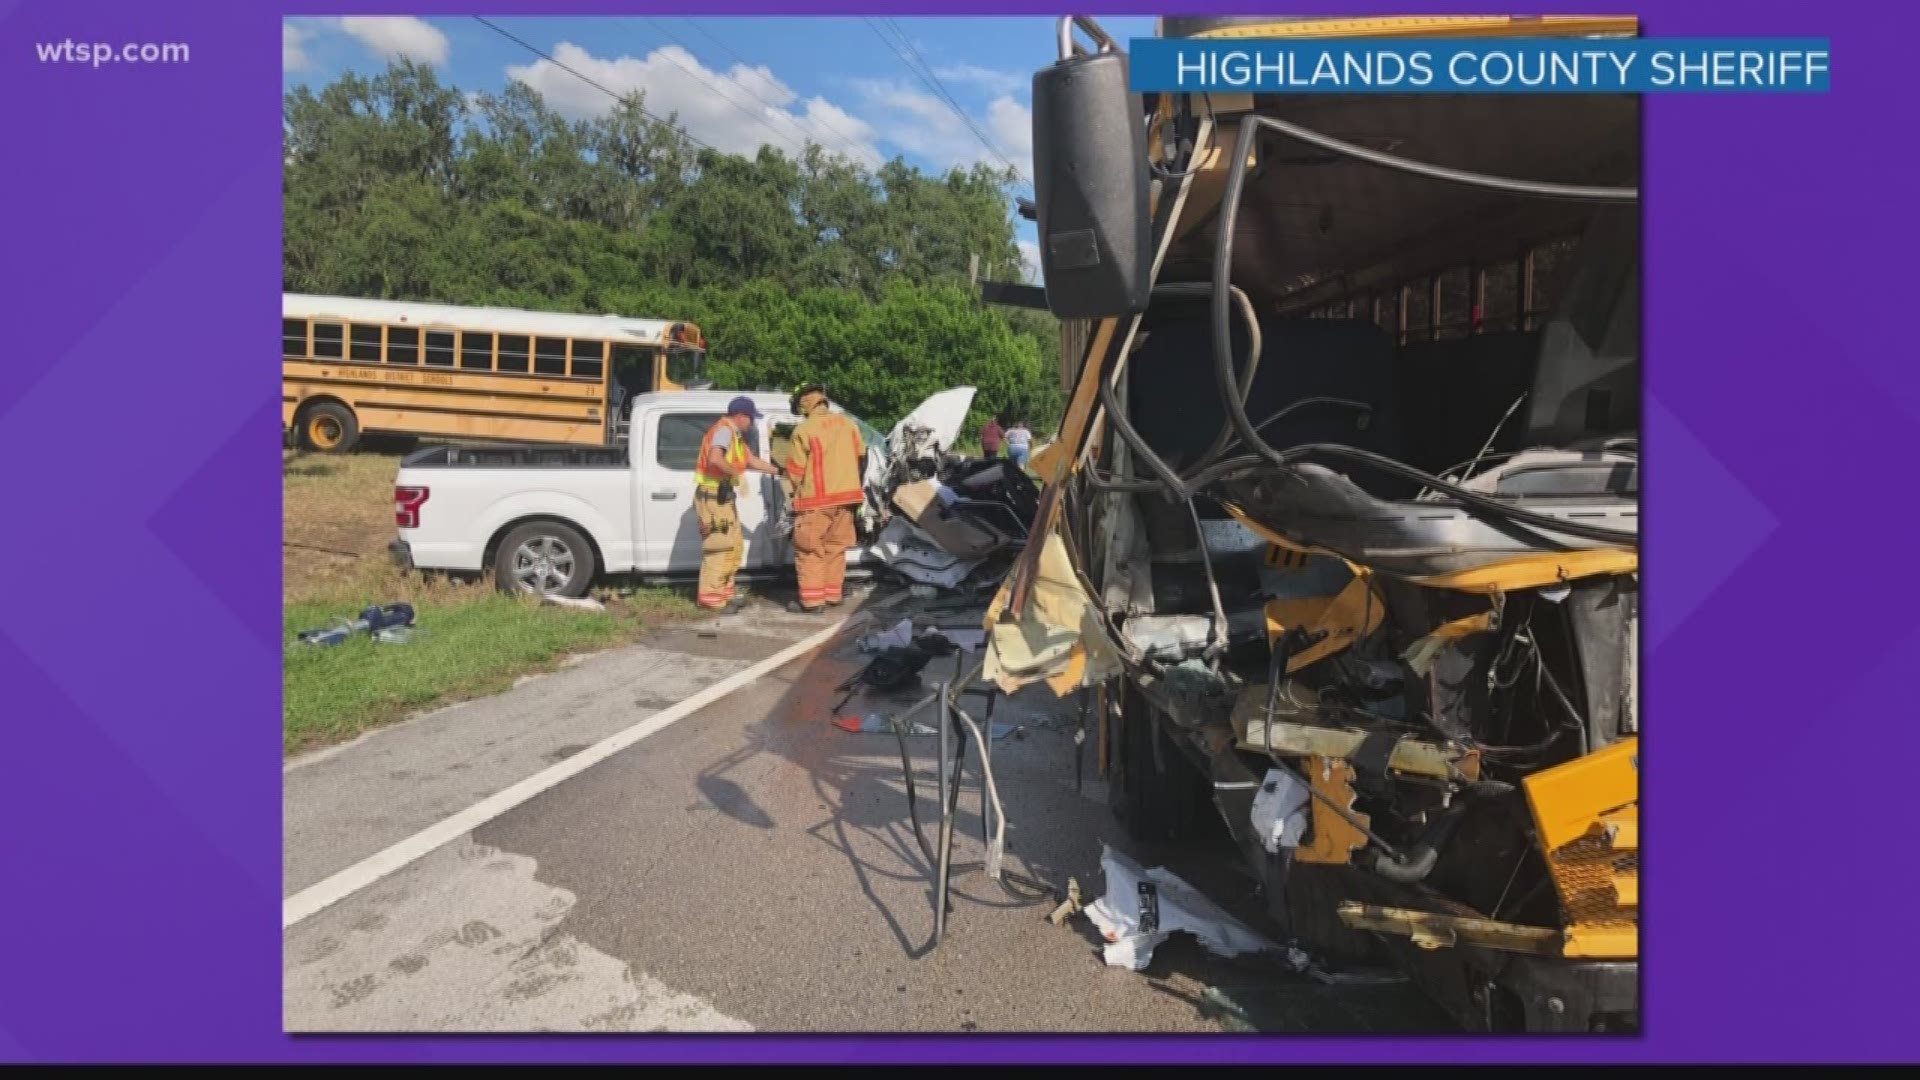 Deputies say the truck drifted into the center lane and hit the bus head-on. https://bit.ly/2IUGBxN